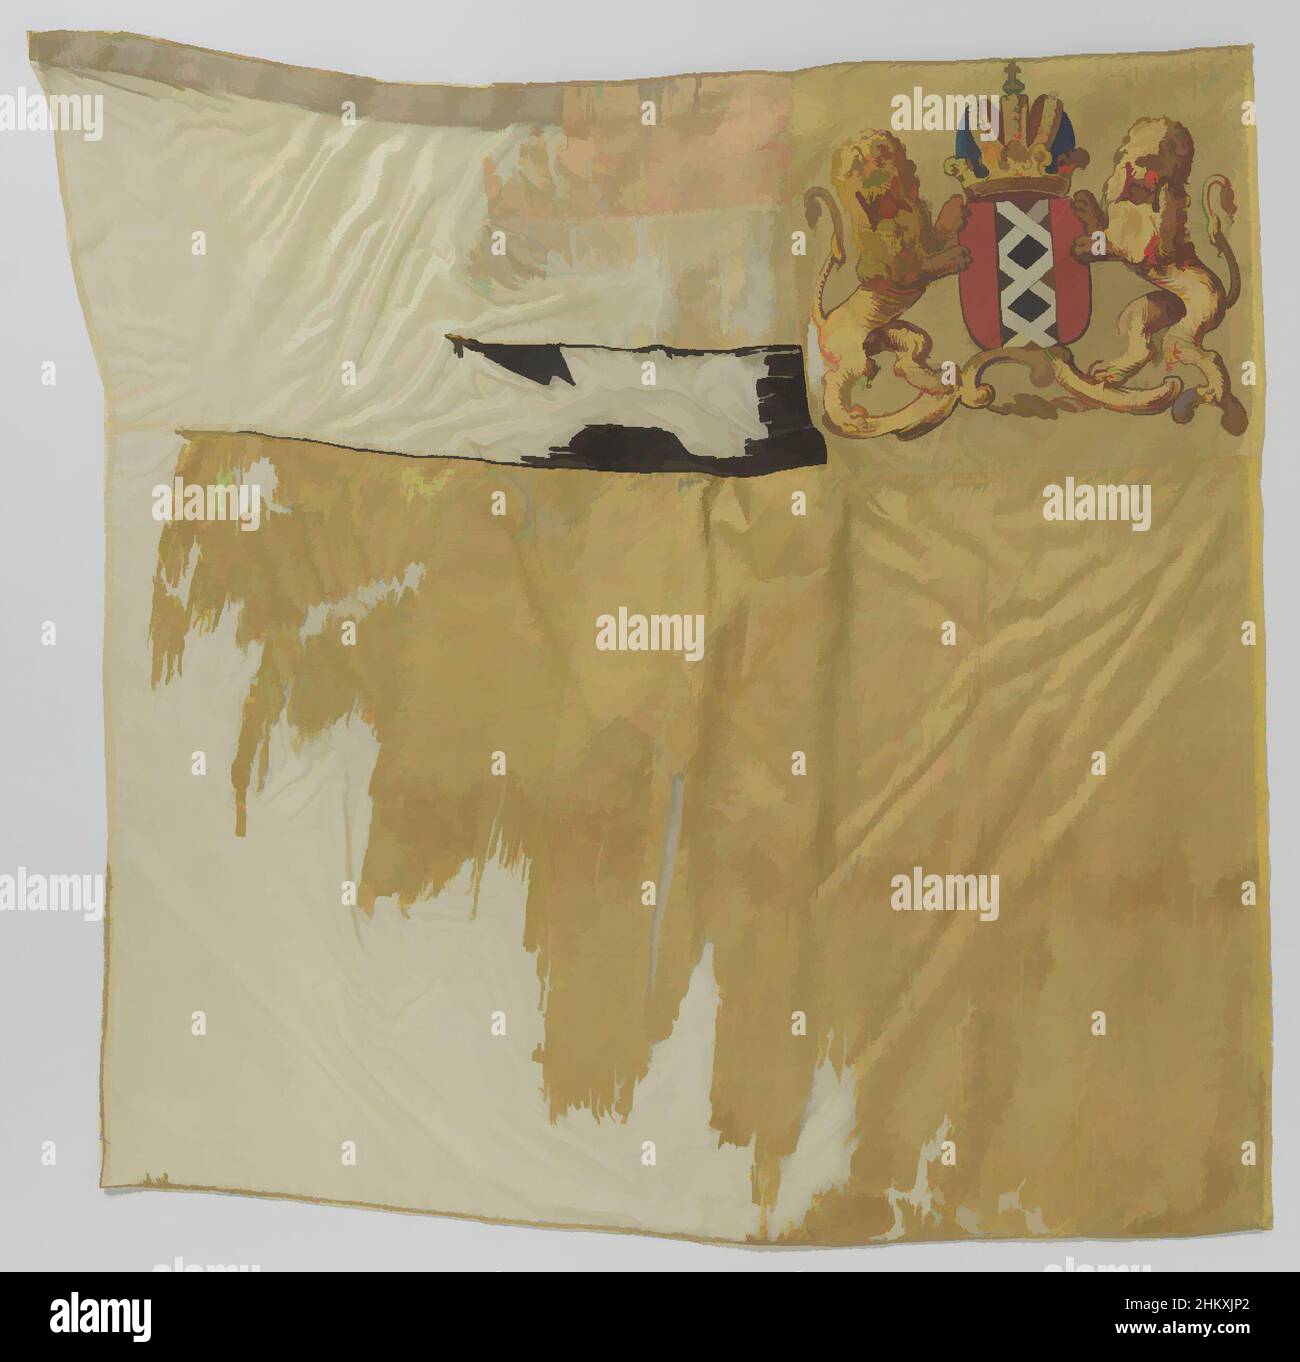 Art inspired by Banner of the yellow regiment, Yellow banner. Front and parade side identical. Along the top three bands of red-white-black. In the upper neck a yellow rectangle with the arms of Amsterdam, held by two climbing facing lions and covered by imperial crown. Below the coat, Classic works modernized by Artotop with a splash of modernity. Shapes, color and value, eye-catching visual impact on art. Emotions through freedom of artworks in a contemporary way. A timeless message pursuing a wildly creative new direction. Artists turning to the digital medium and creating the Artotop NFT Stock Photo